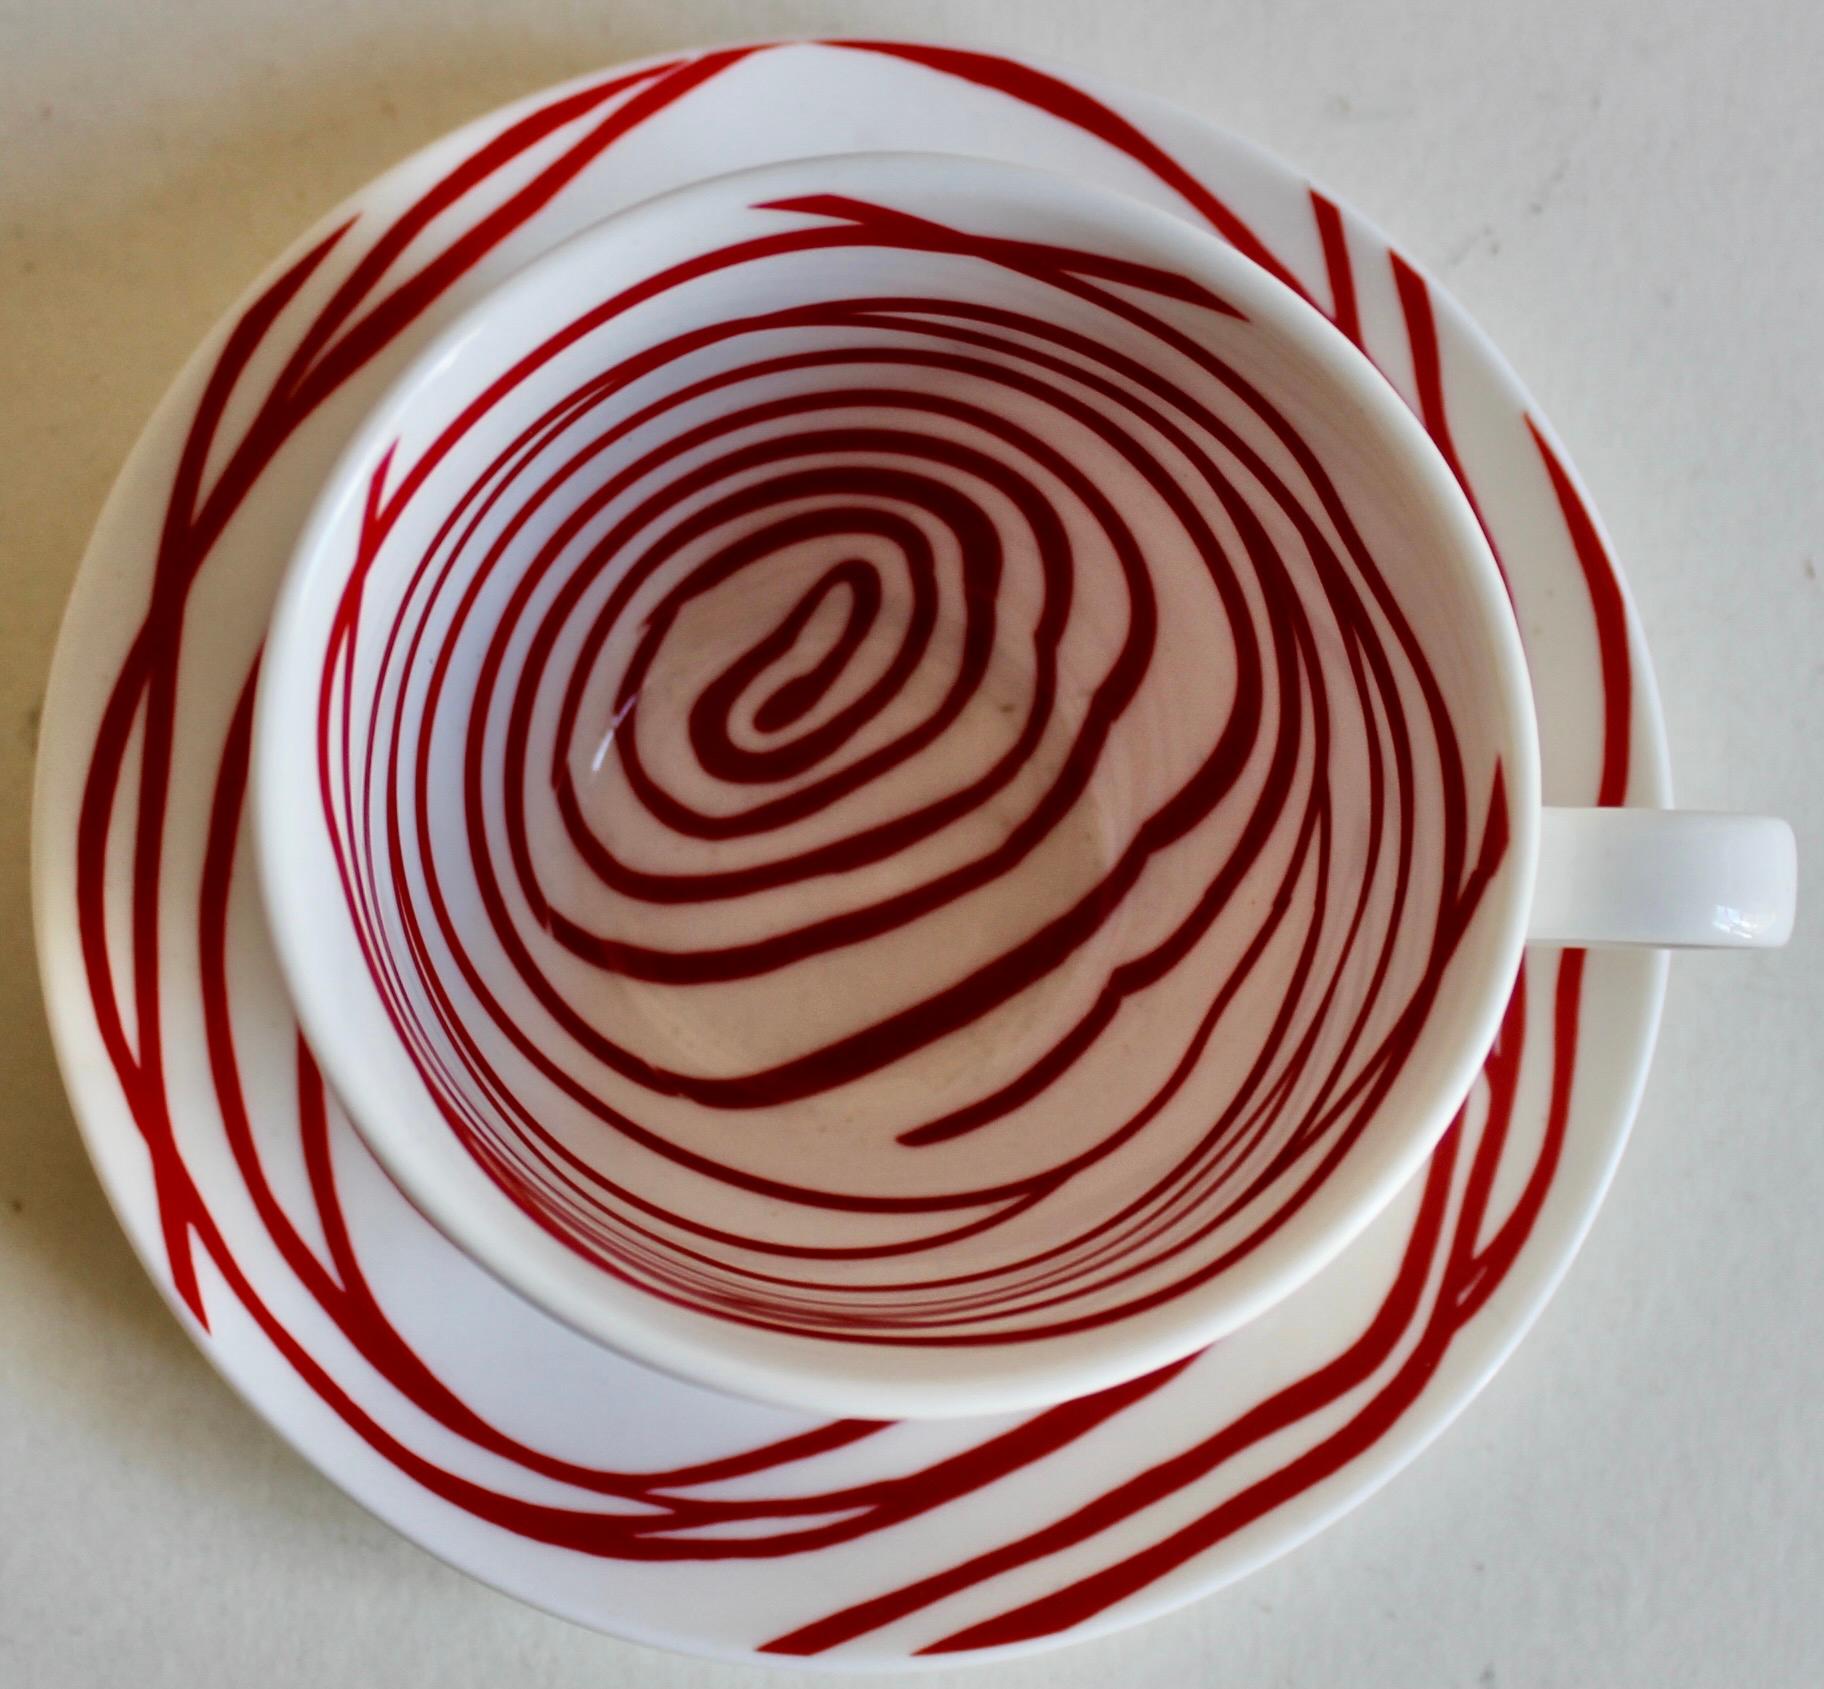 Ceramic Louise Bourgeois Cup & Saucer for MOMA For Sale